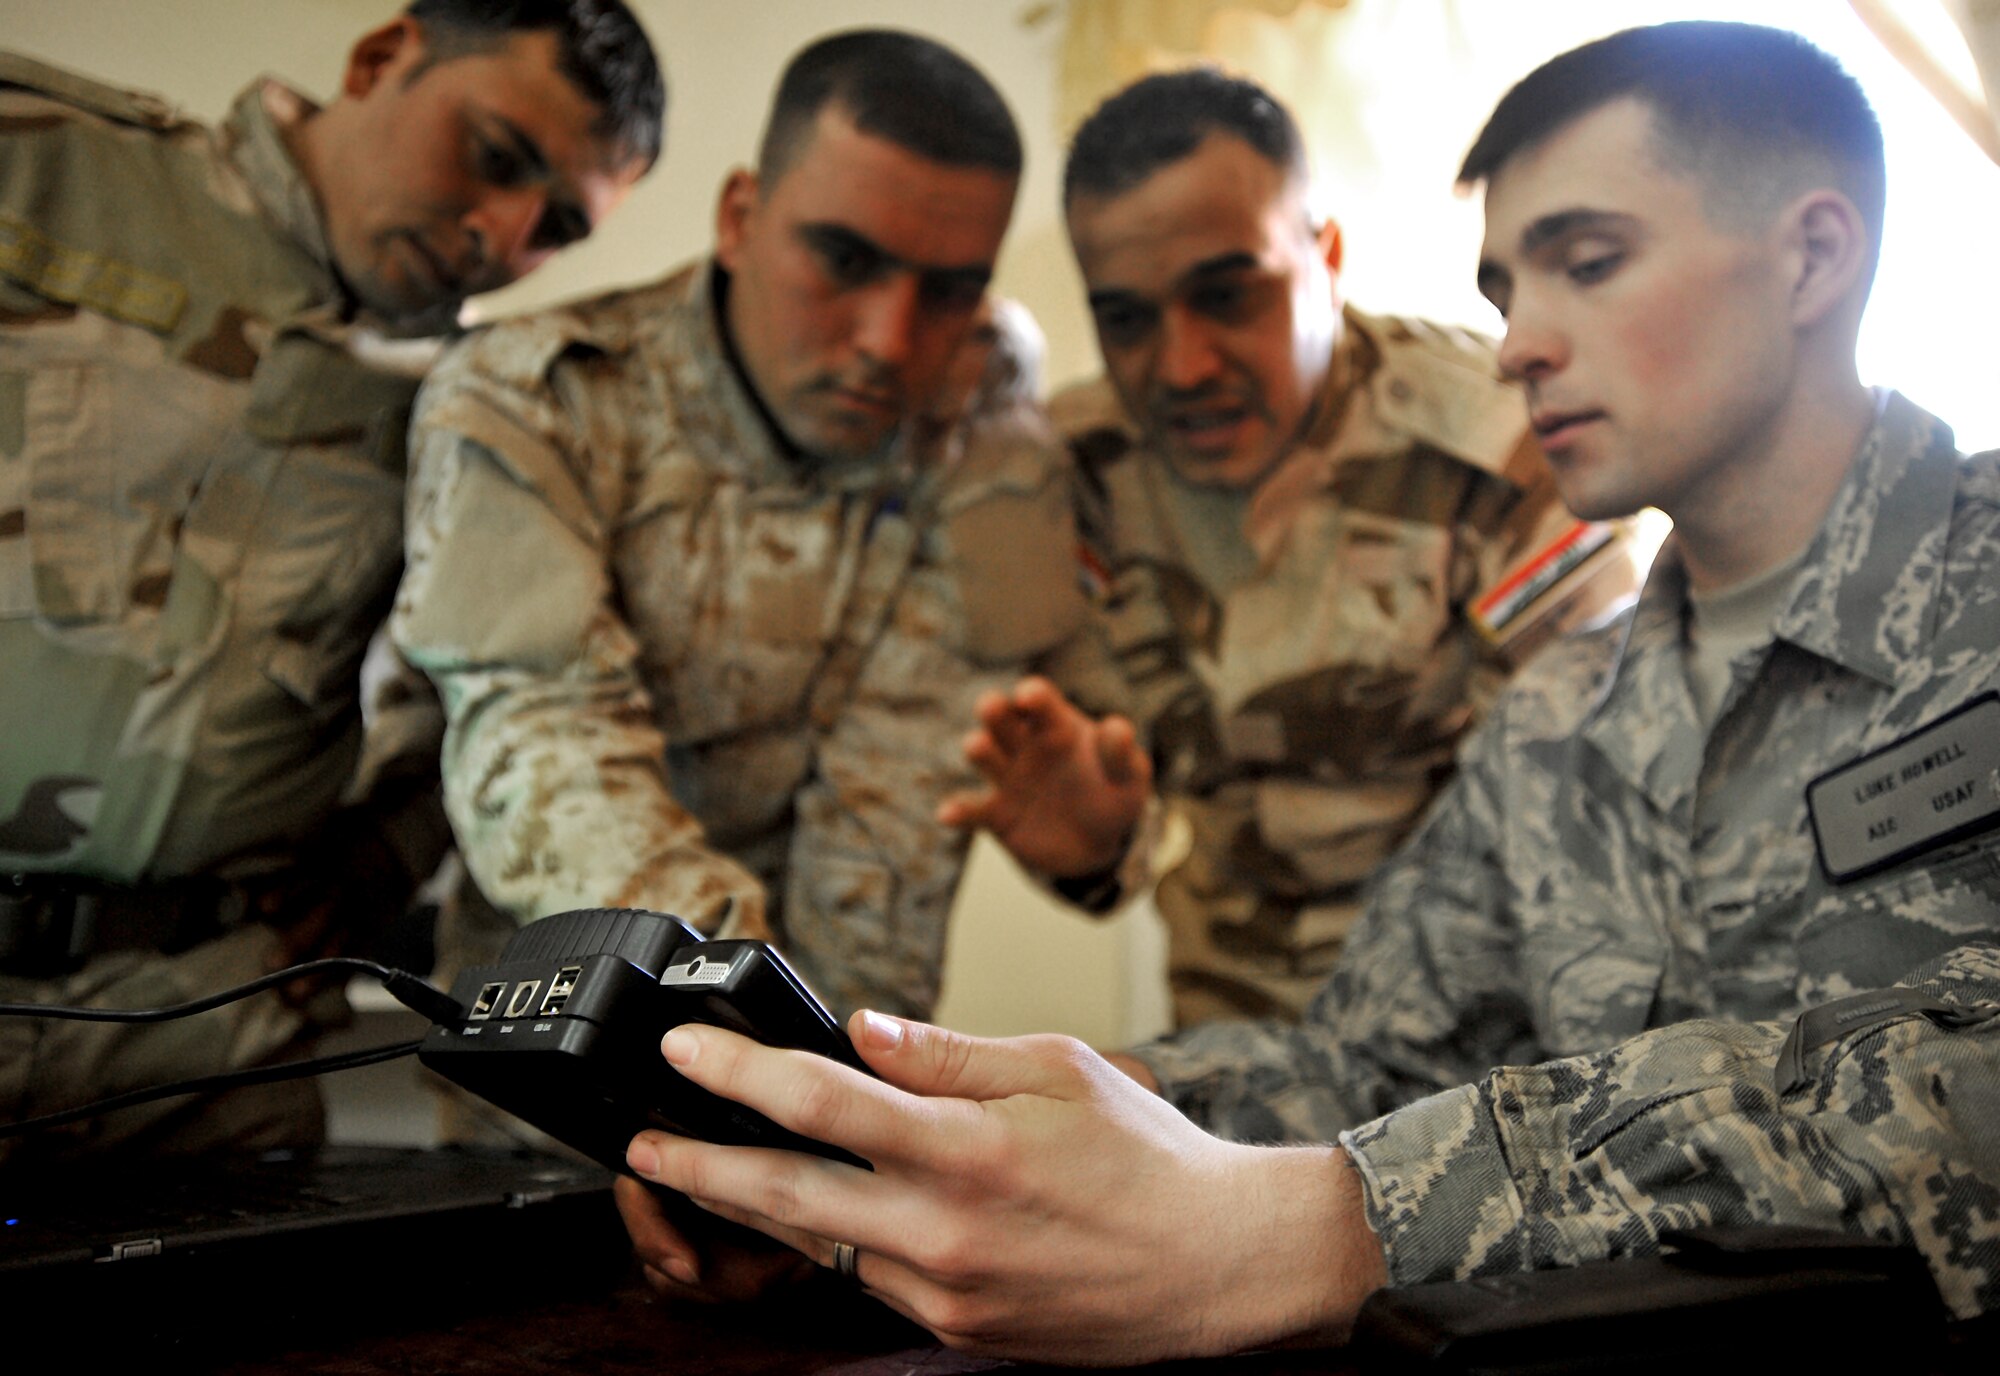 Airman 1st Class Luke Howell shows Iraqi soldiers how to use a CelleBrite machine to gather intelligence from a phone Jan. 5, 2011, on Joint Security Station Constitution, Iraq. Airman Howell is a documentation and media exploitation analyst at Camp Liberty, Iraq. The DOMEX mission is to gather actionable intelligence from documents, electronic devices and other materials collected on the battlefield. (U.S. Air Force photo/Senior Airman Andrew Lee)